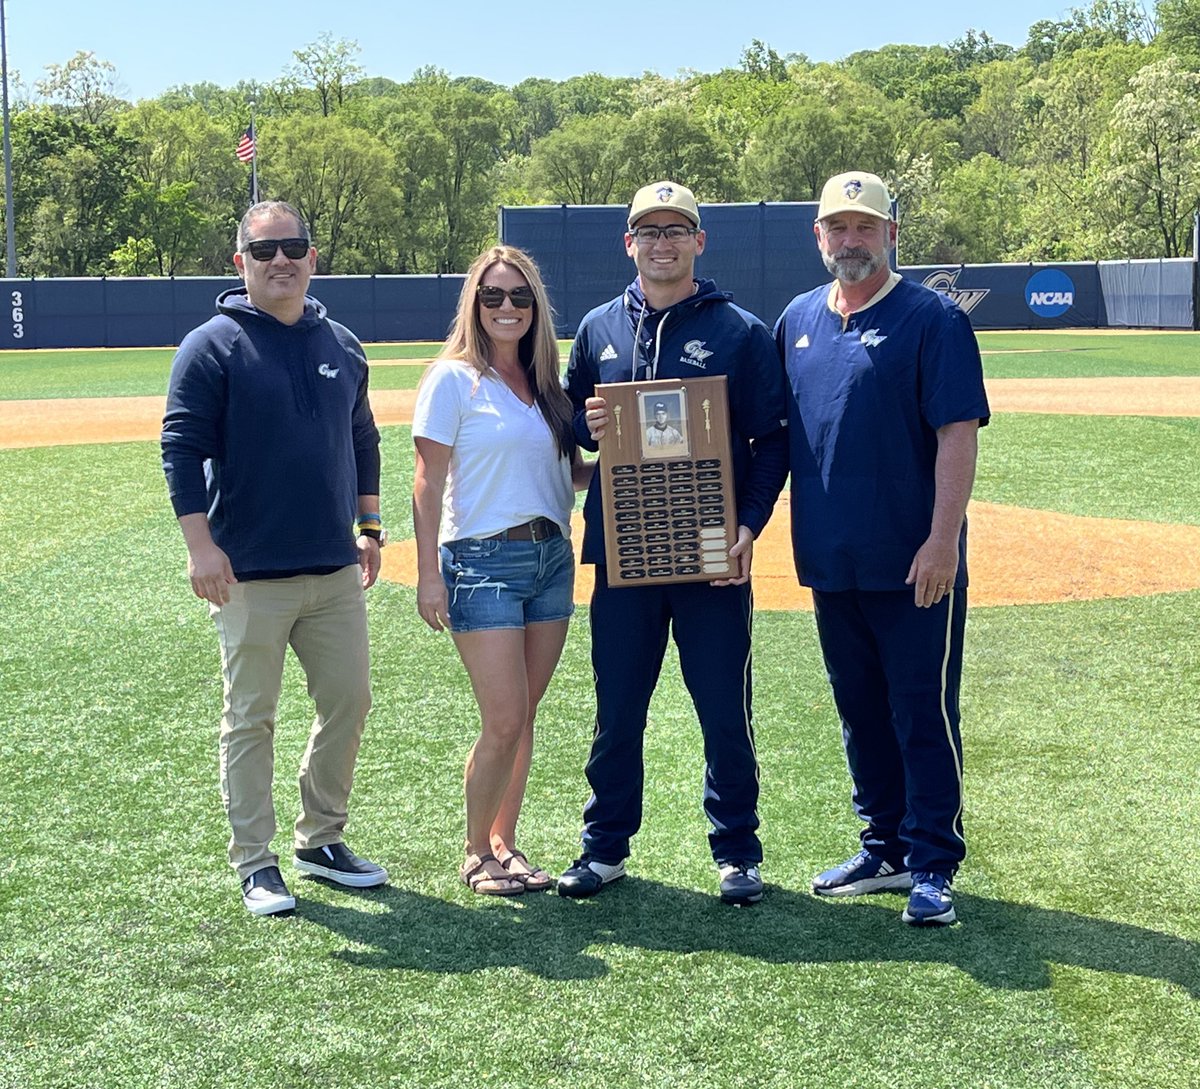 Prior to today’s game, @jarrettkorson15 was honored with the Warren Fulton Award. Jarrett was joined by his parents and head coach Gregg Ritchie on field during the award presentation. Congrats, Jarrett! #RaiseHigh